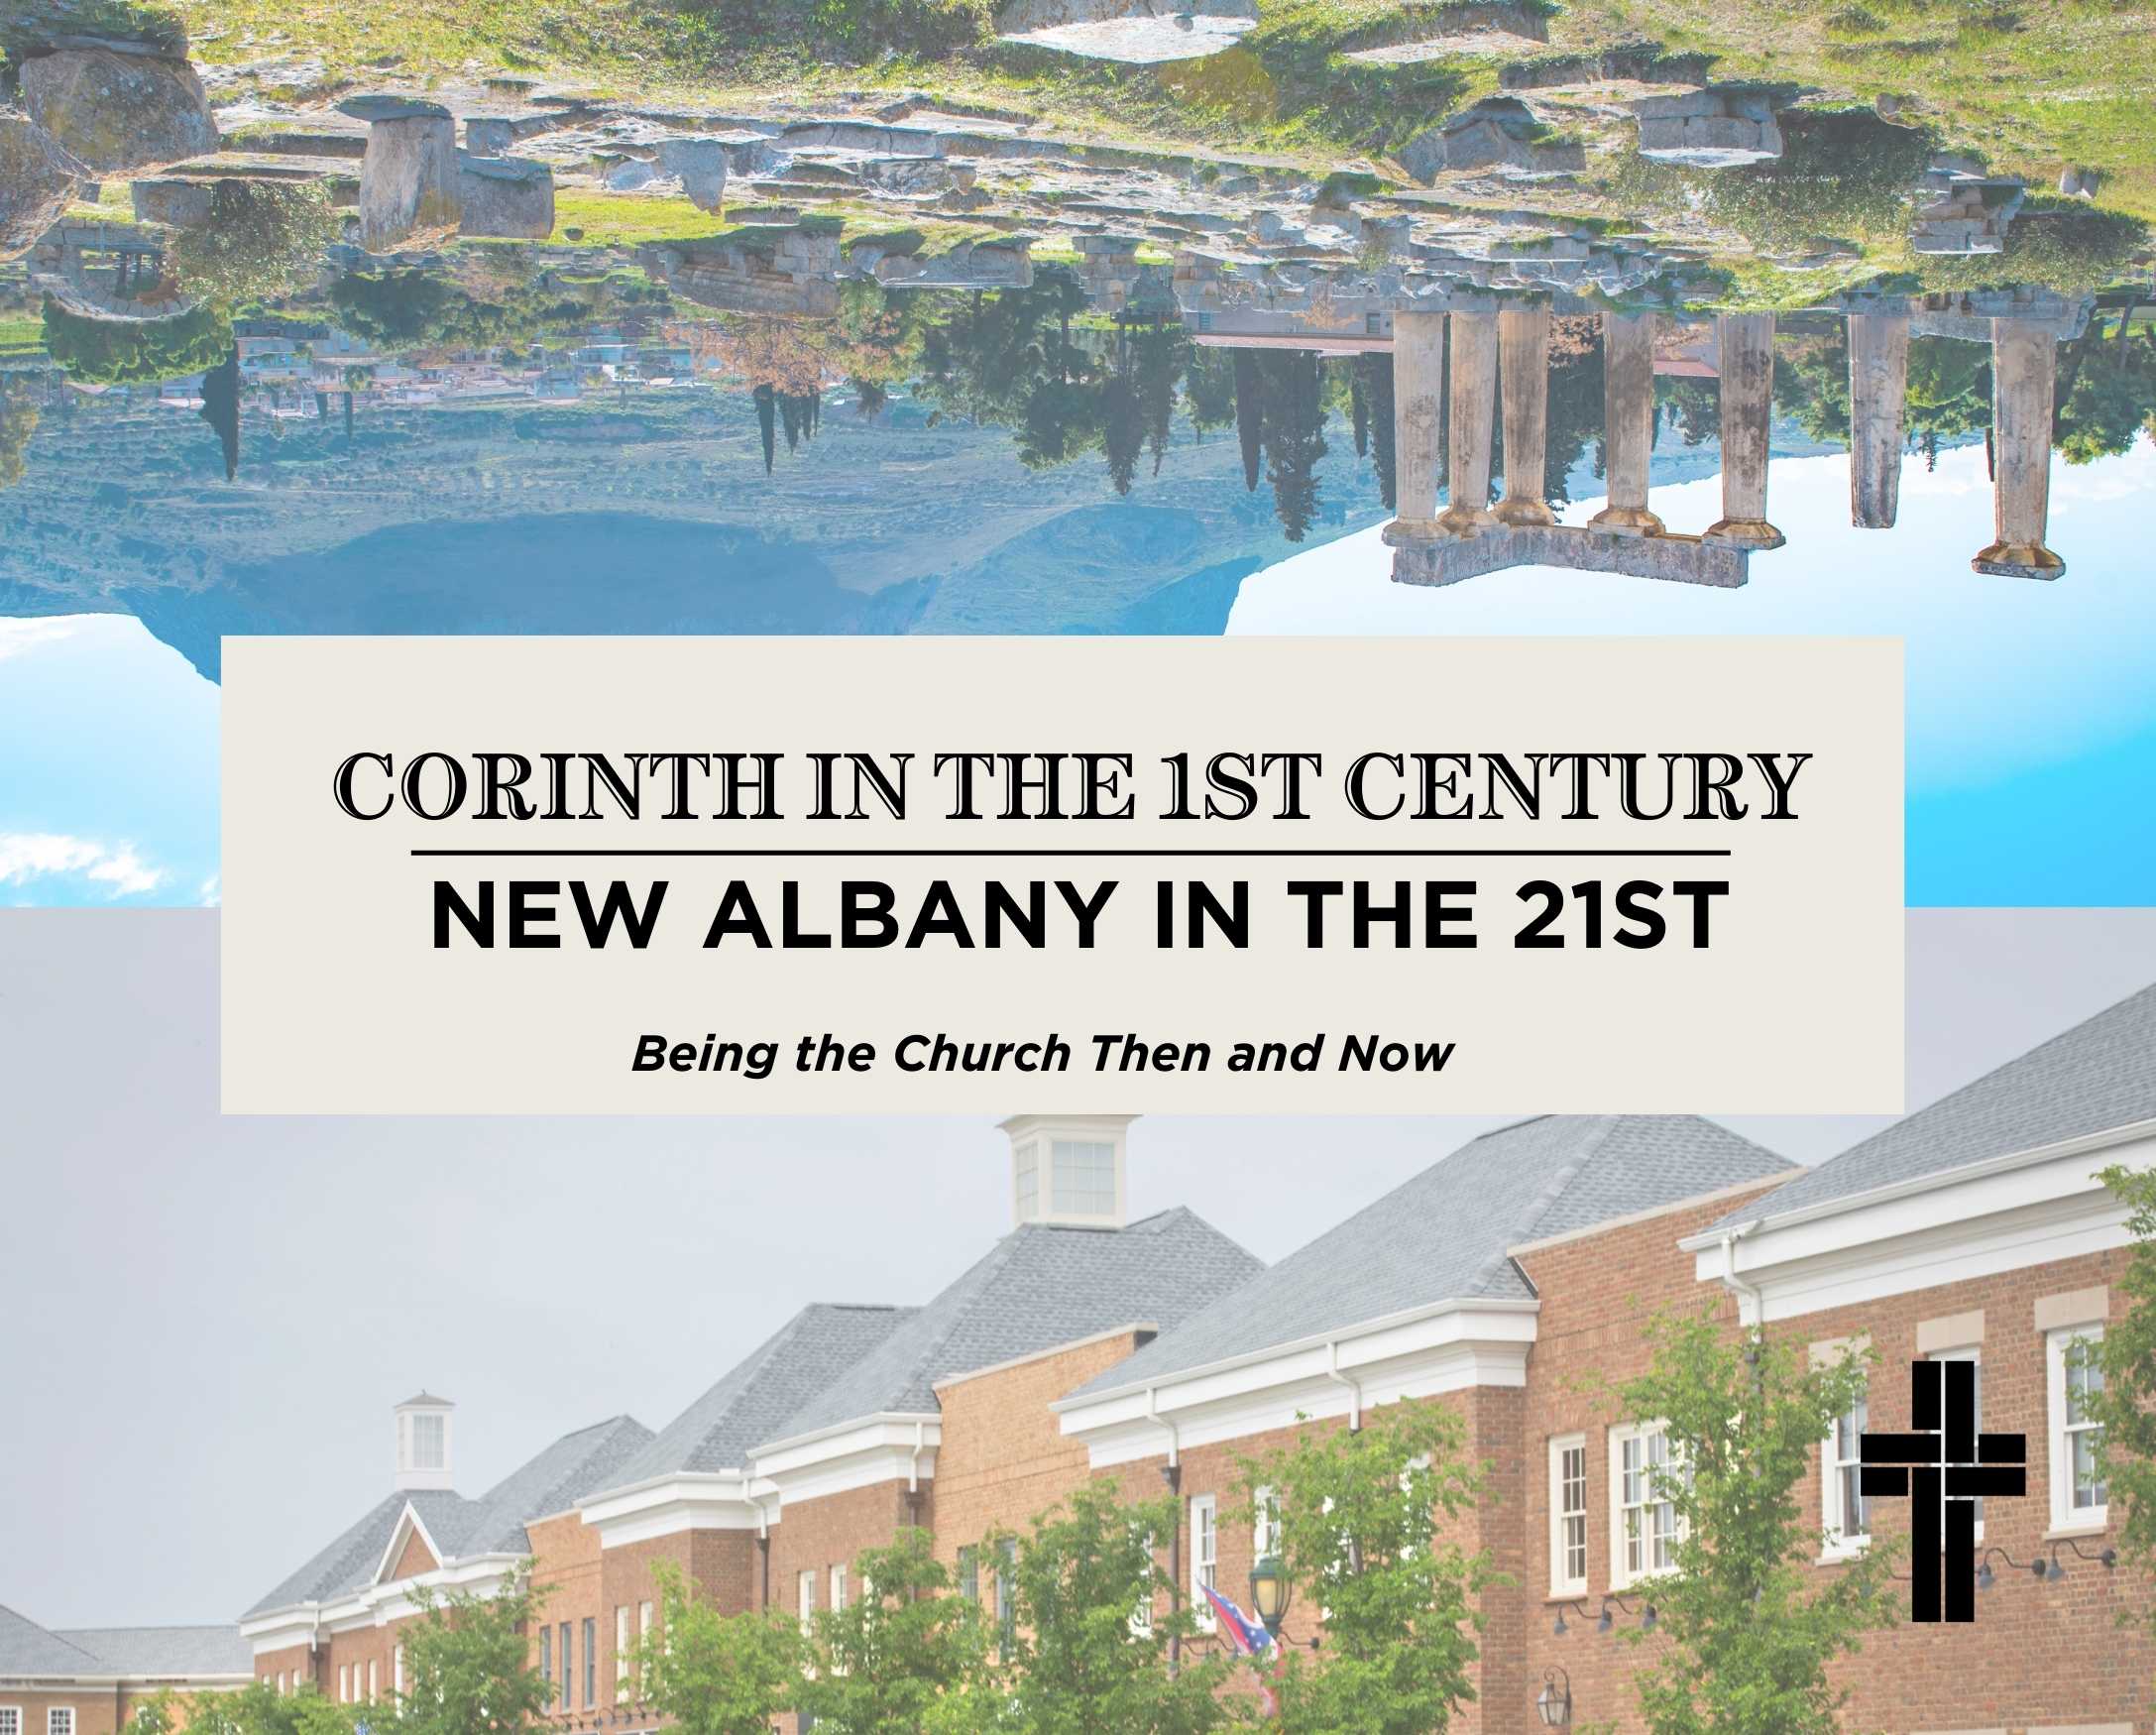 Corinth in the 1st Century, New Albany in the 21st: The Foolish Power of God